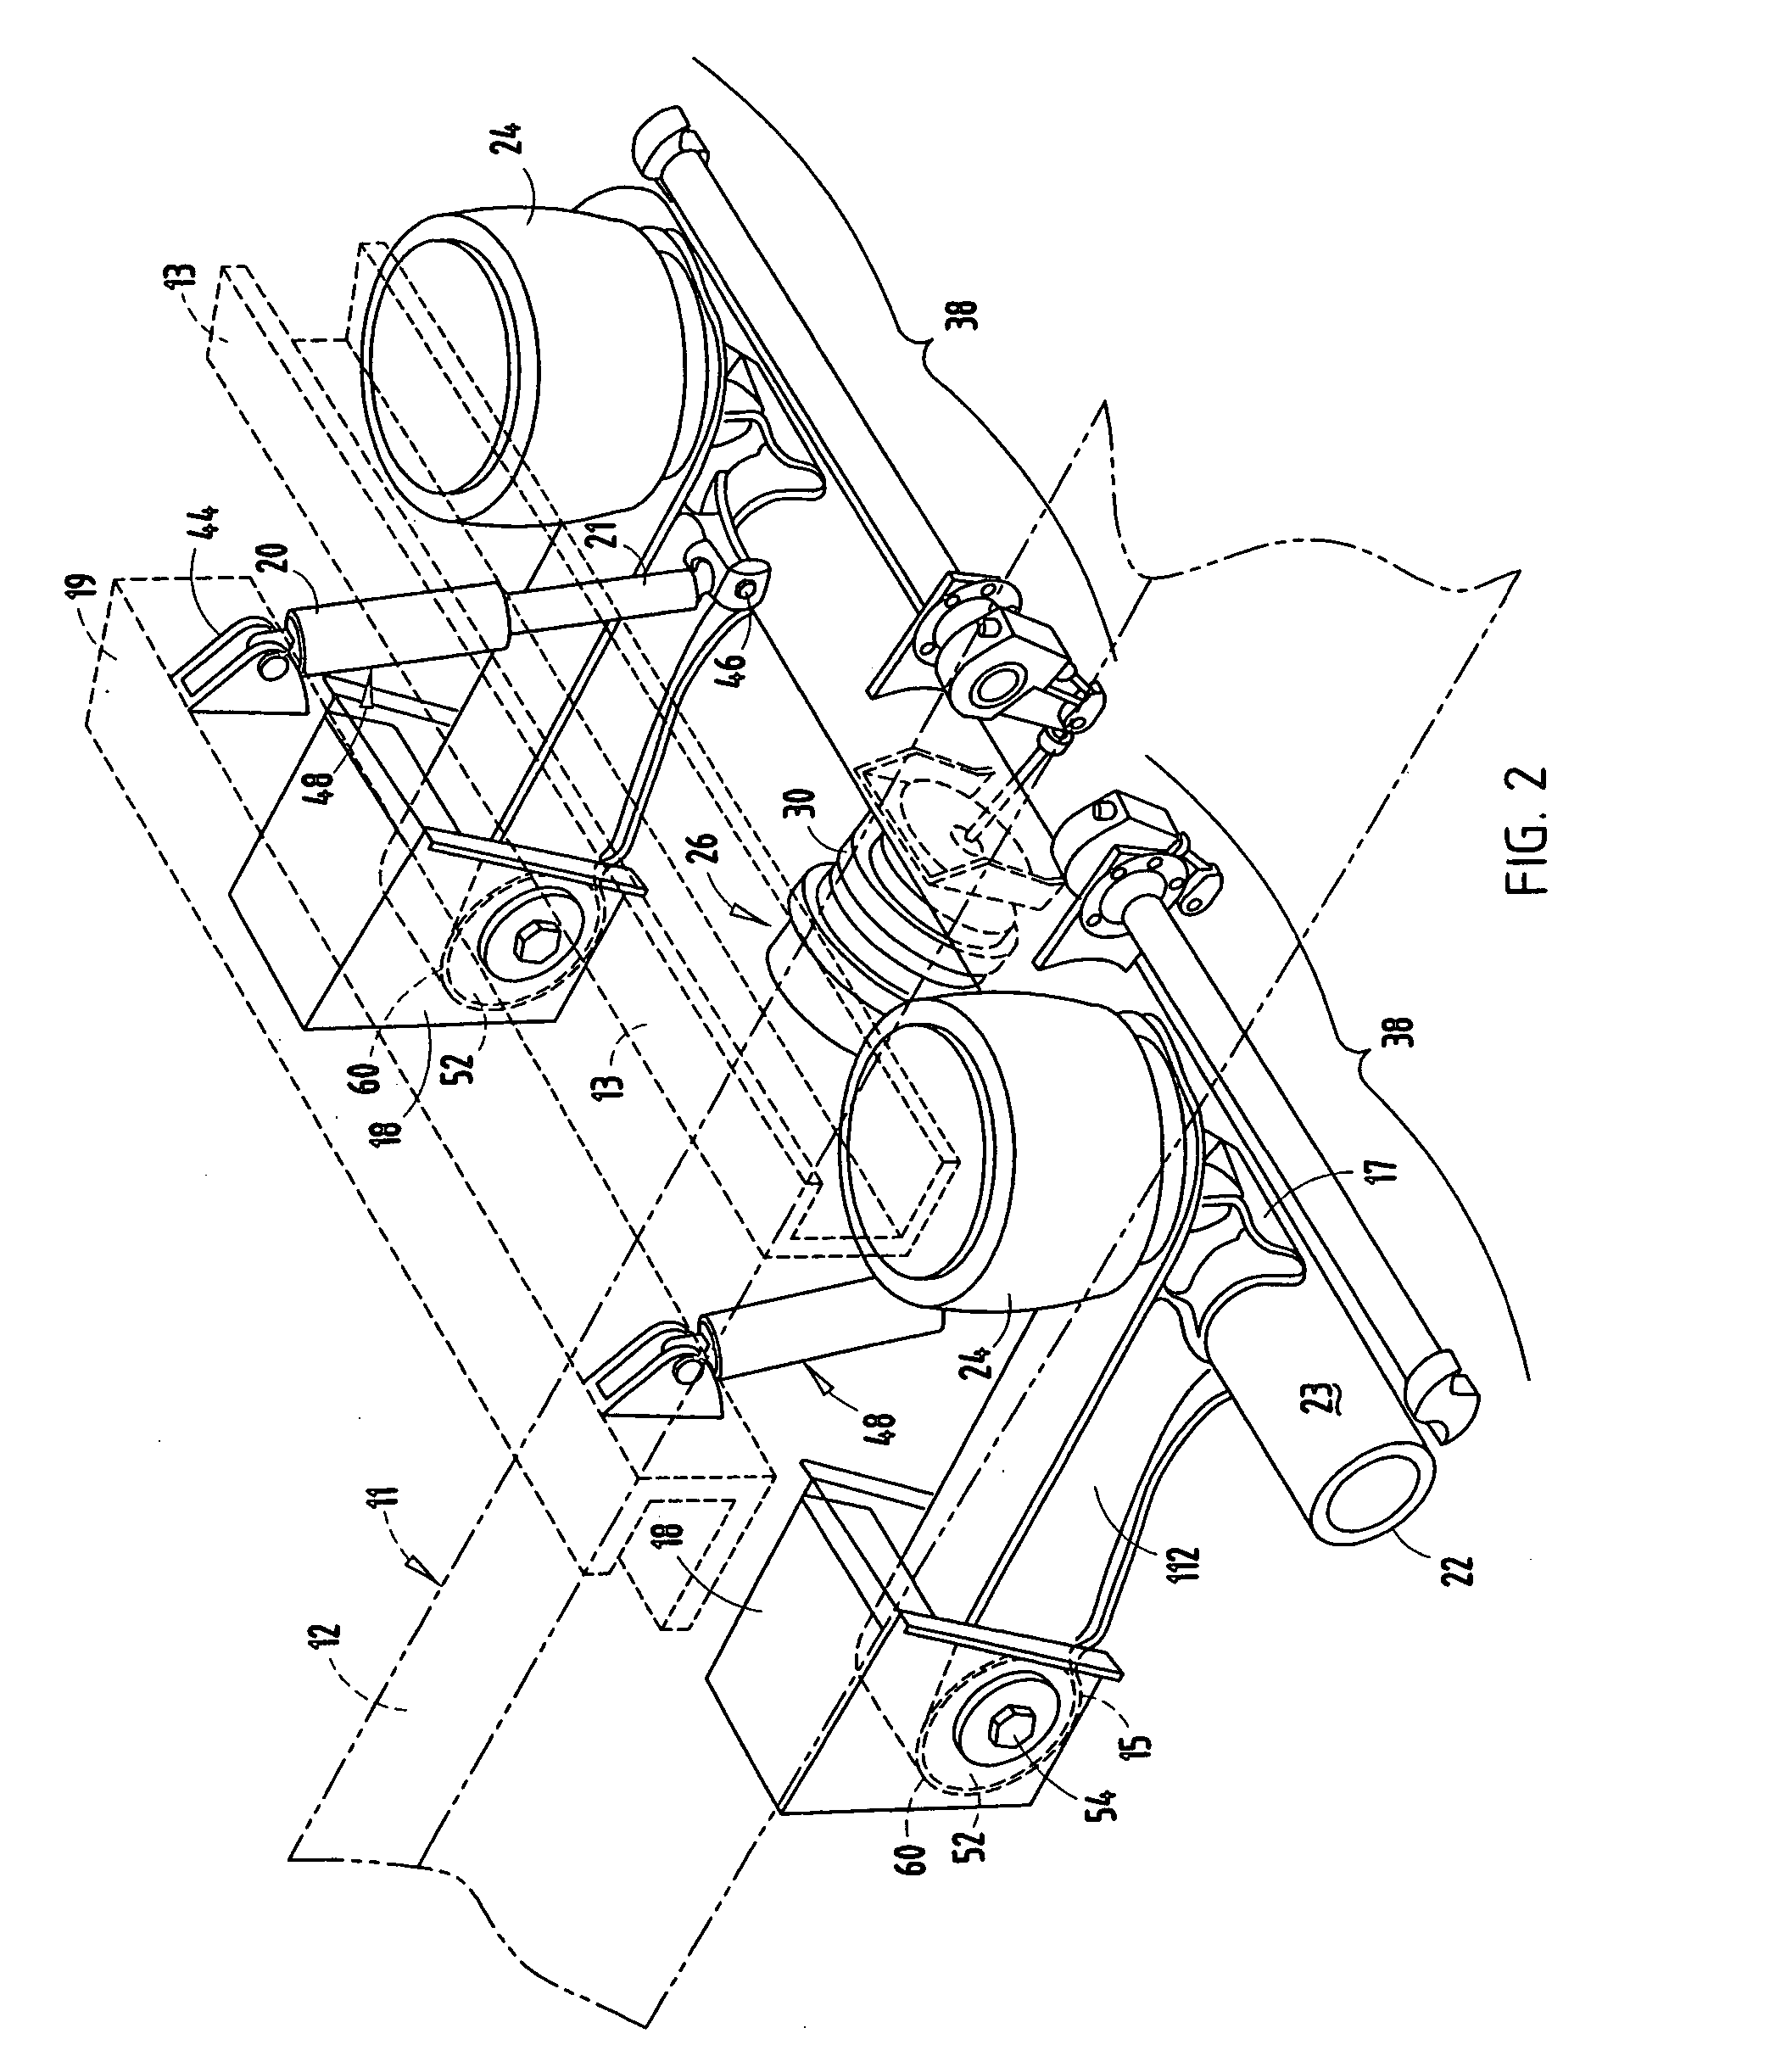 Trailing arm suspension with optimized I-beam